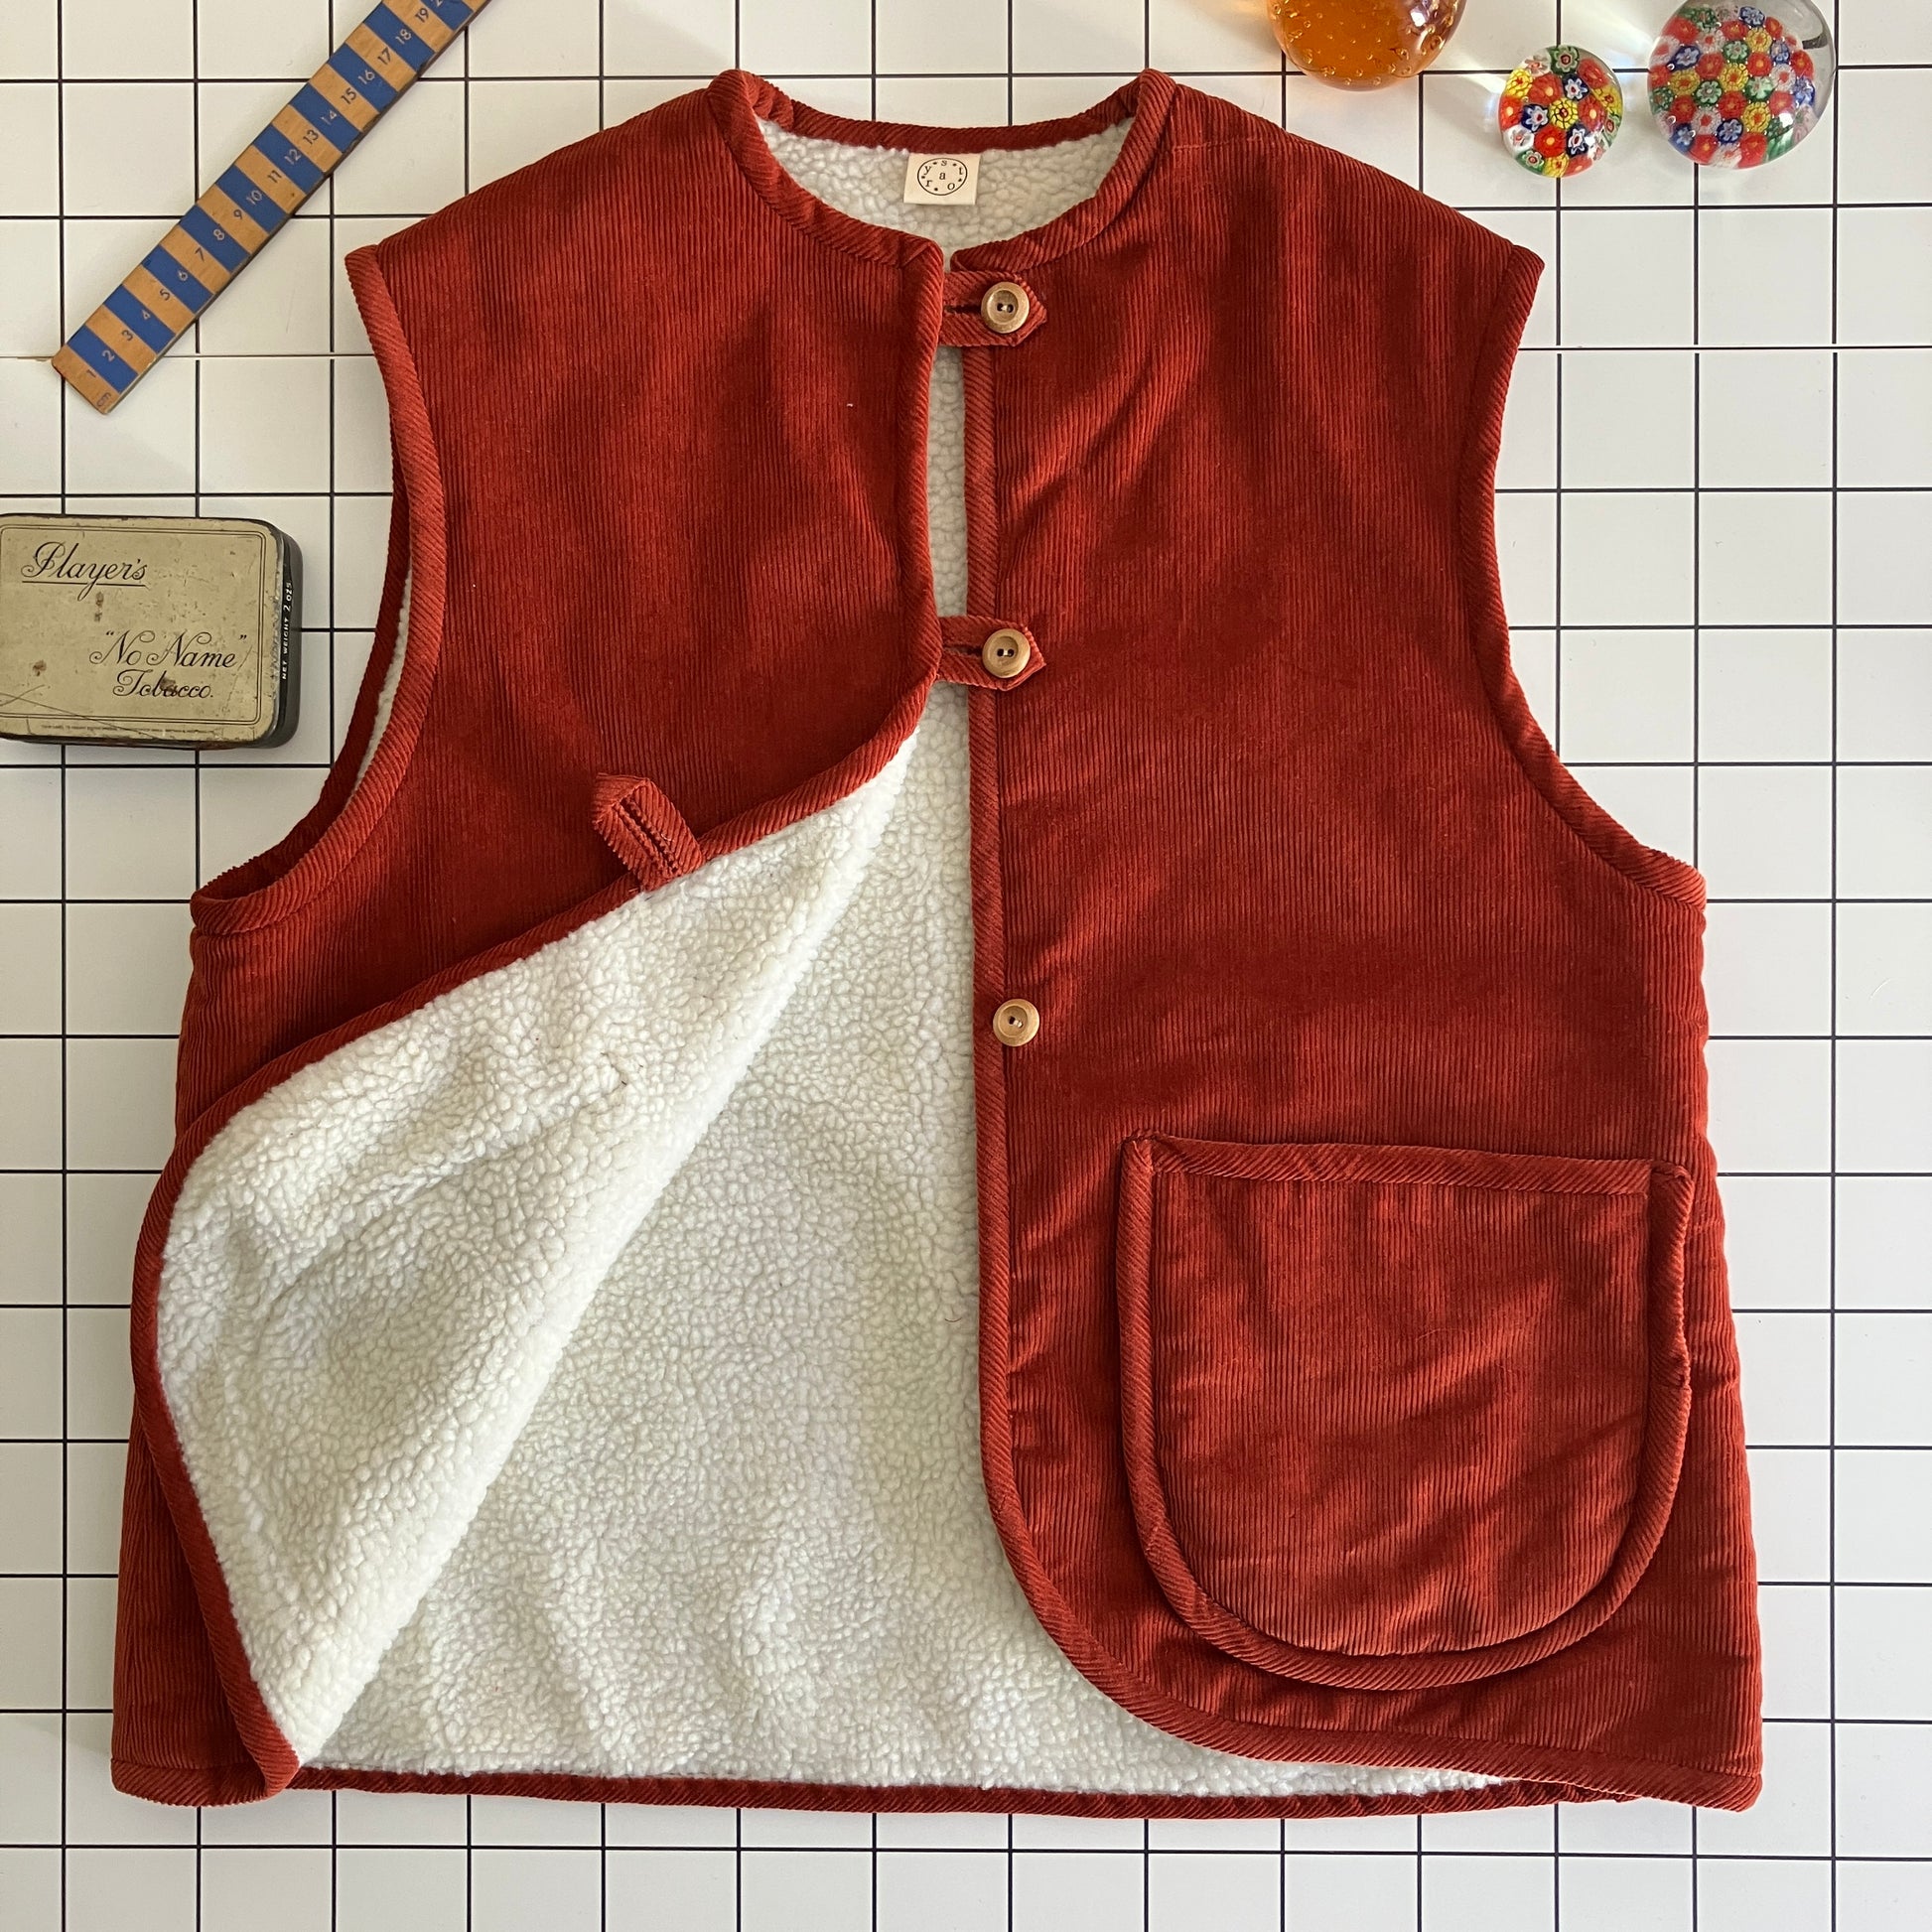 Cosy vest/waistcoat made from a secondhand remnant of rust-coloured corduroy, lined with found faux sheepskin fleece